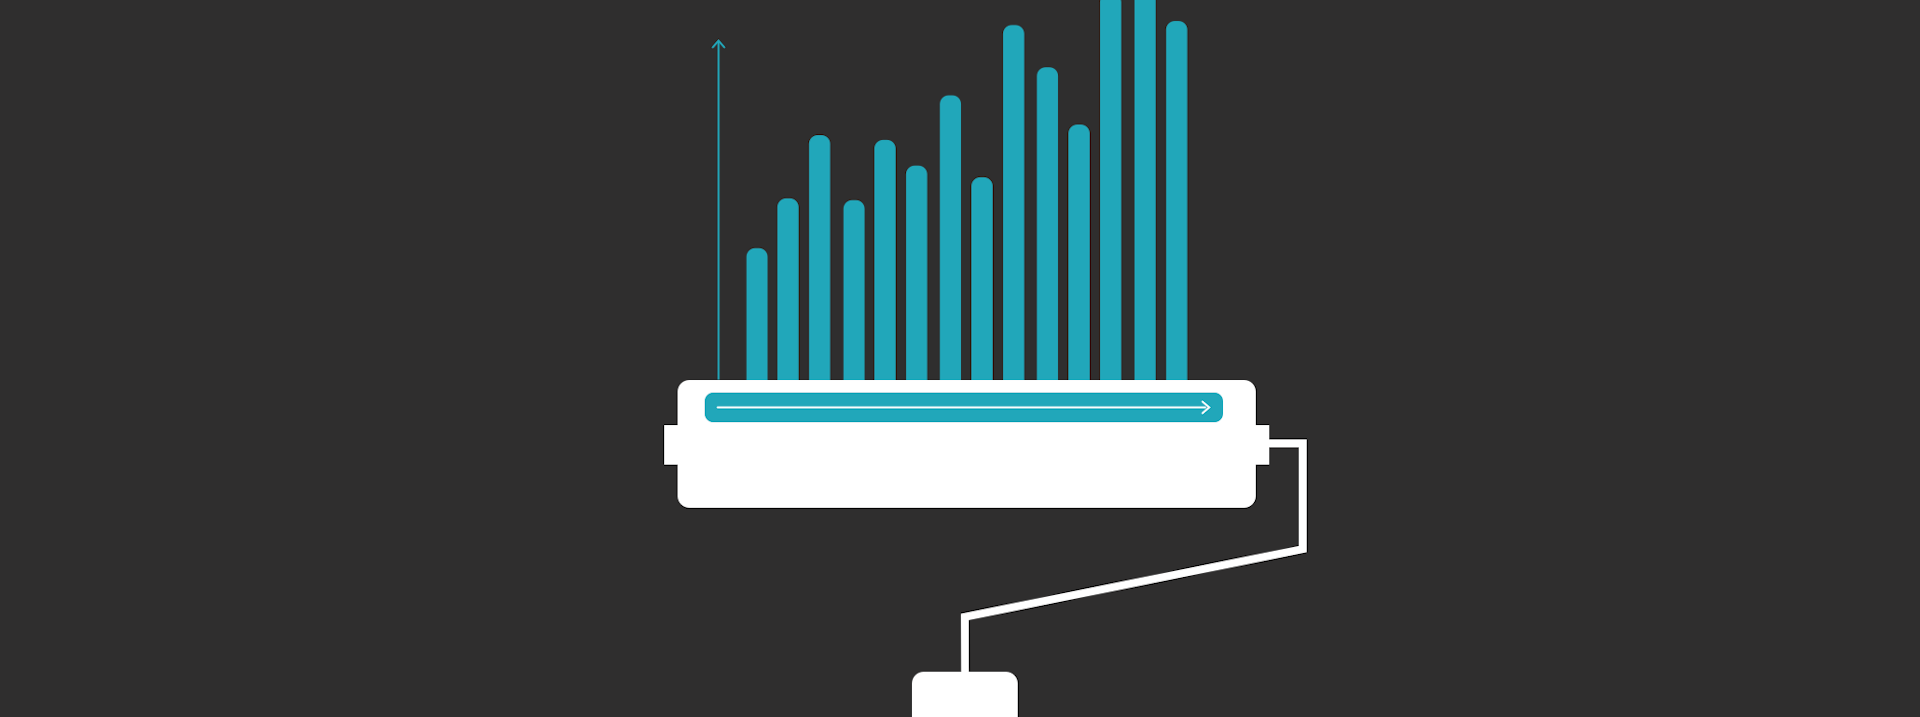 Abstract illustration of a white paint roller applying a blue bar chart onto a black background